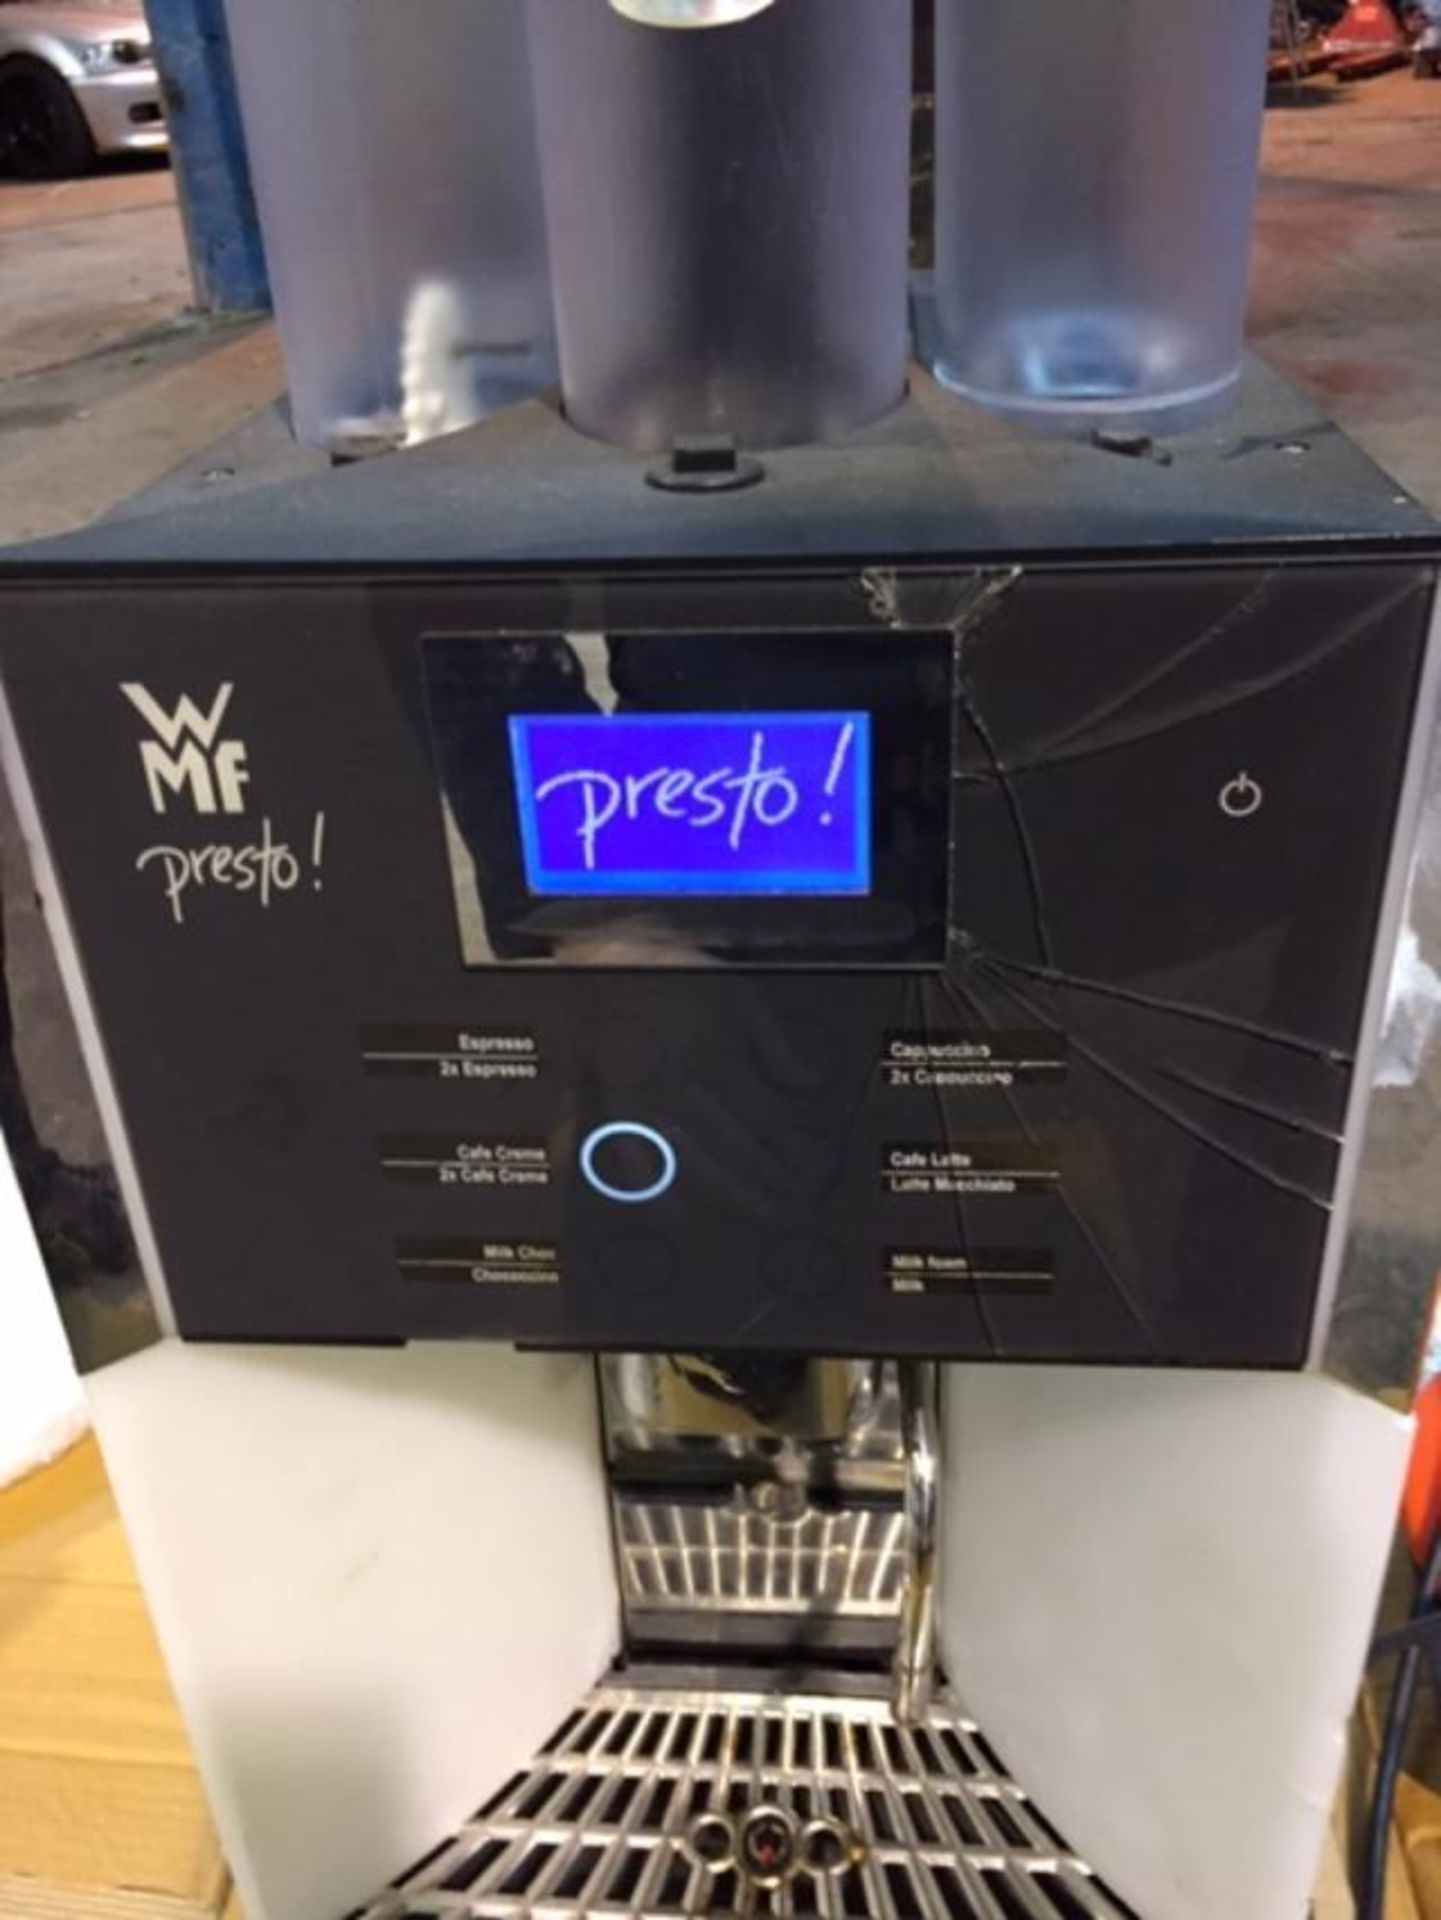 Commercial coffee machine - Image 6 of 6